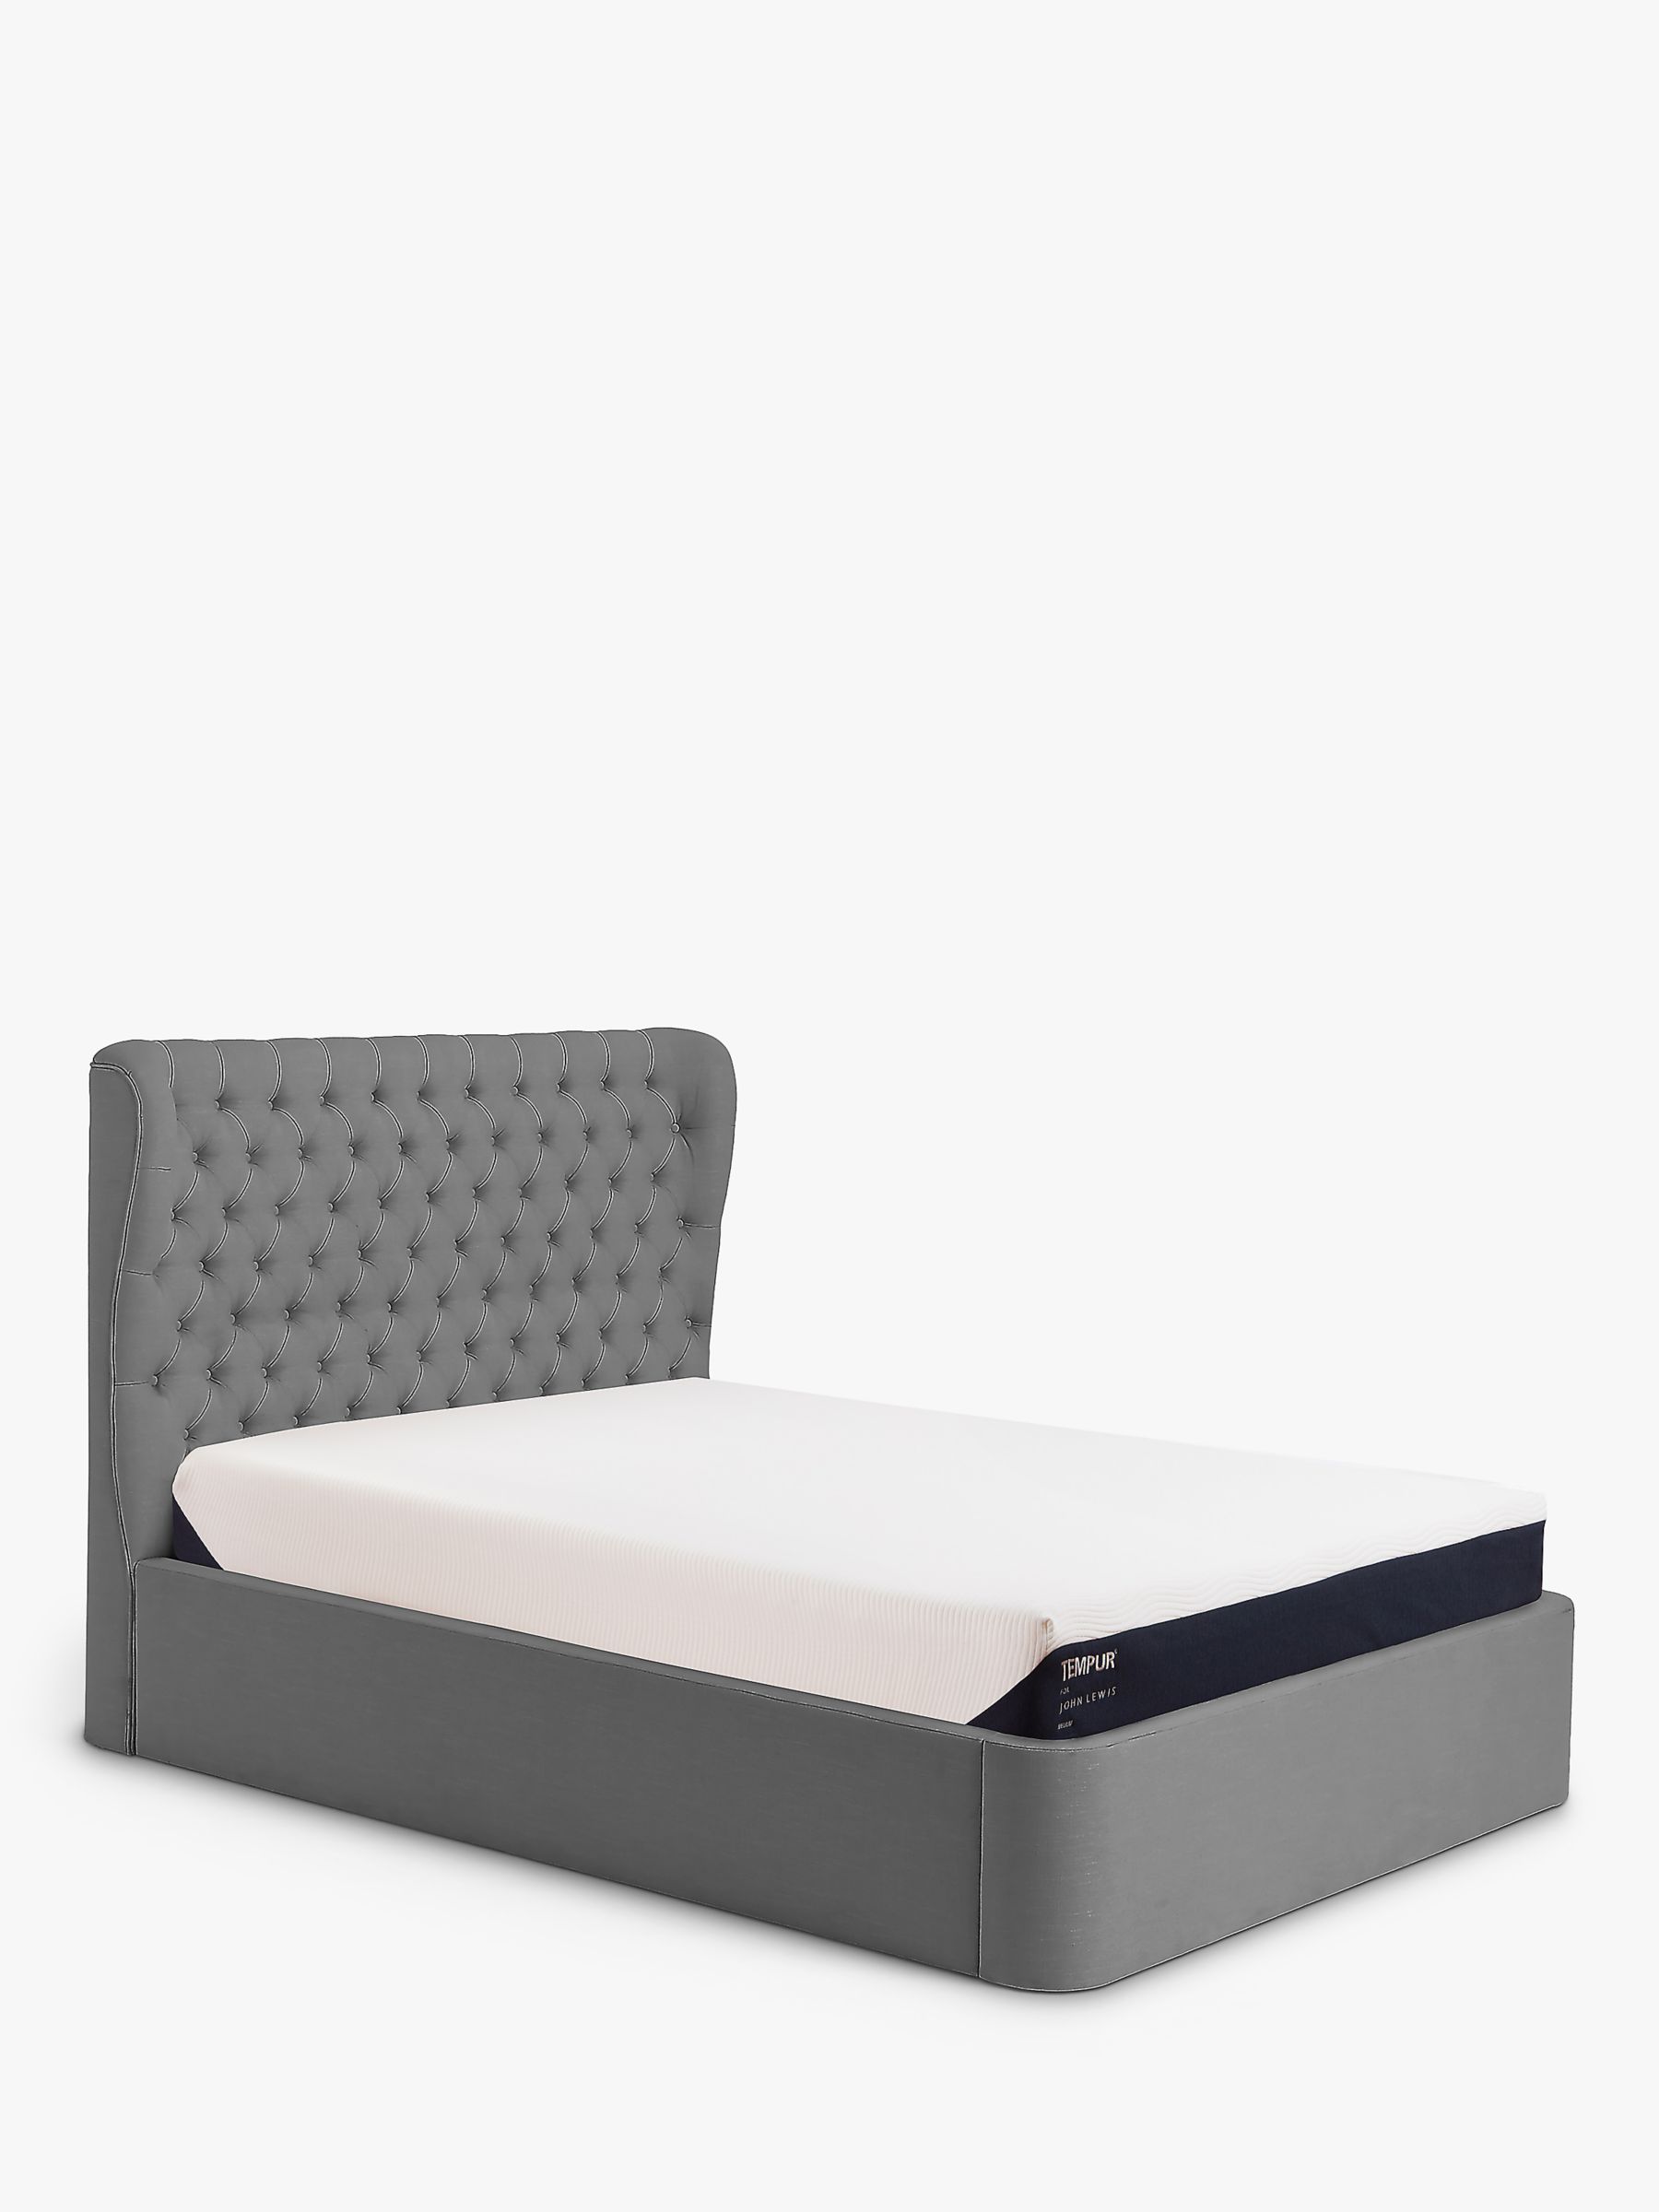 Photo of Tempur® button ottoman storage upholstered bed frame double